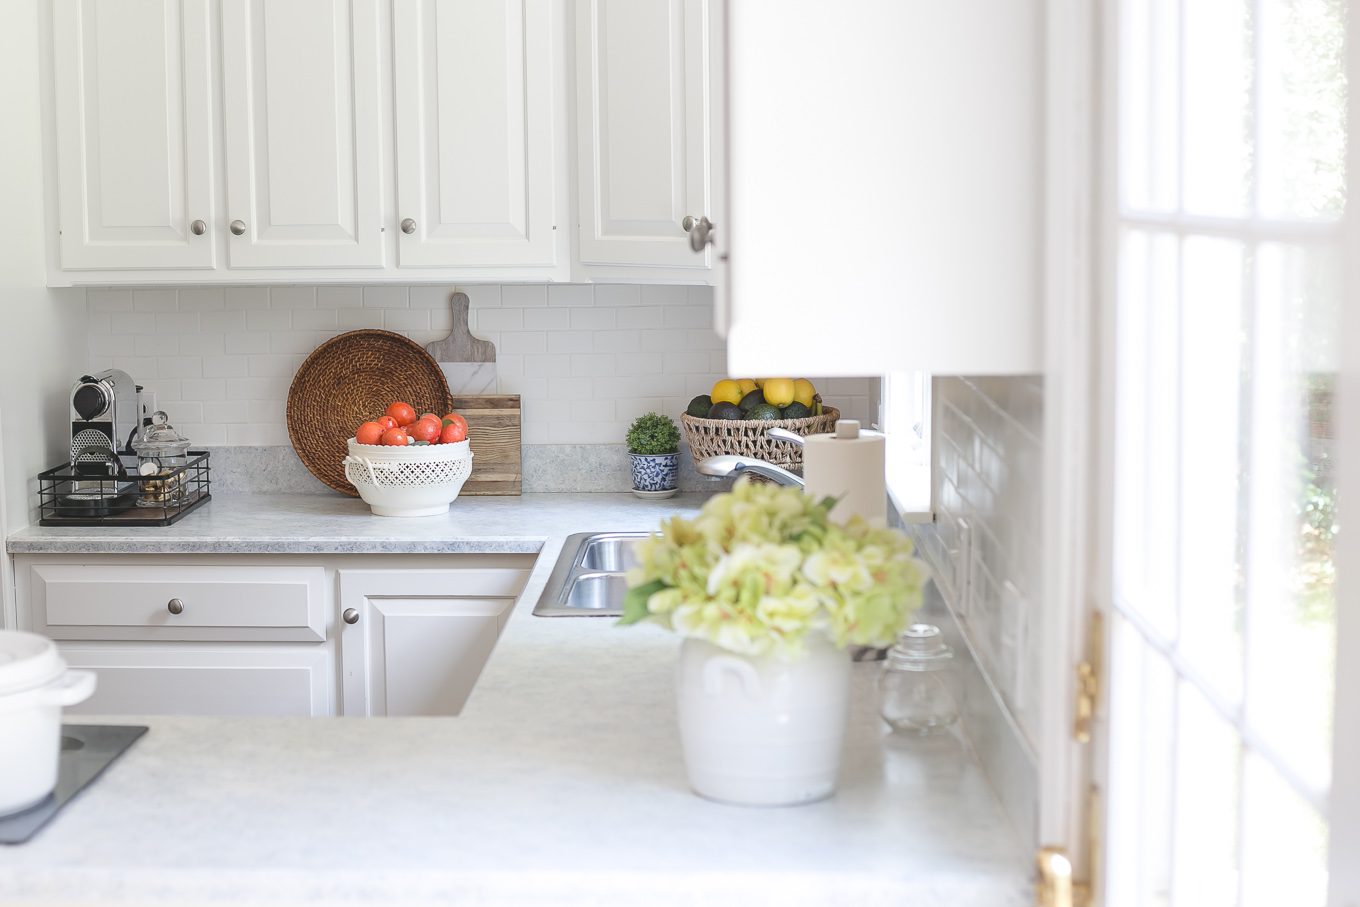 How I Painted My Kitchen Countertops, How To Paint Granite Countertops White